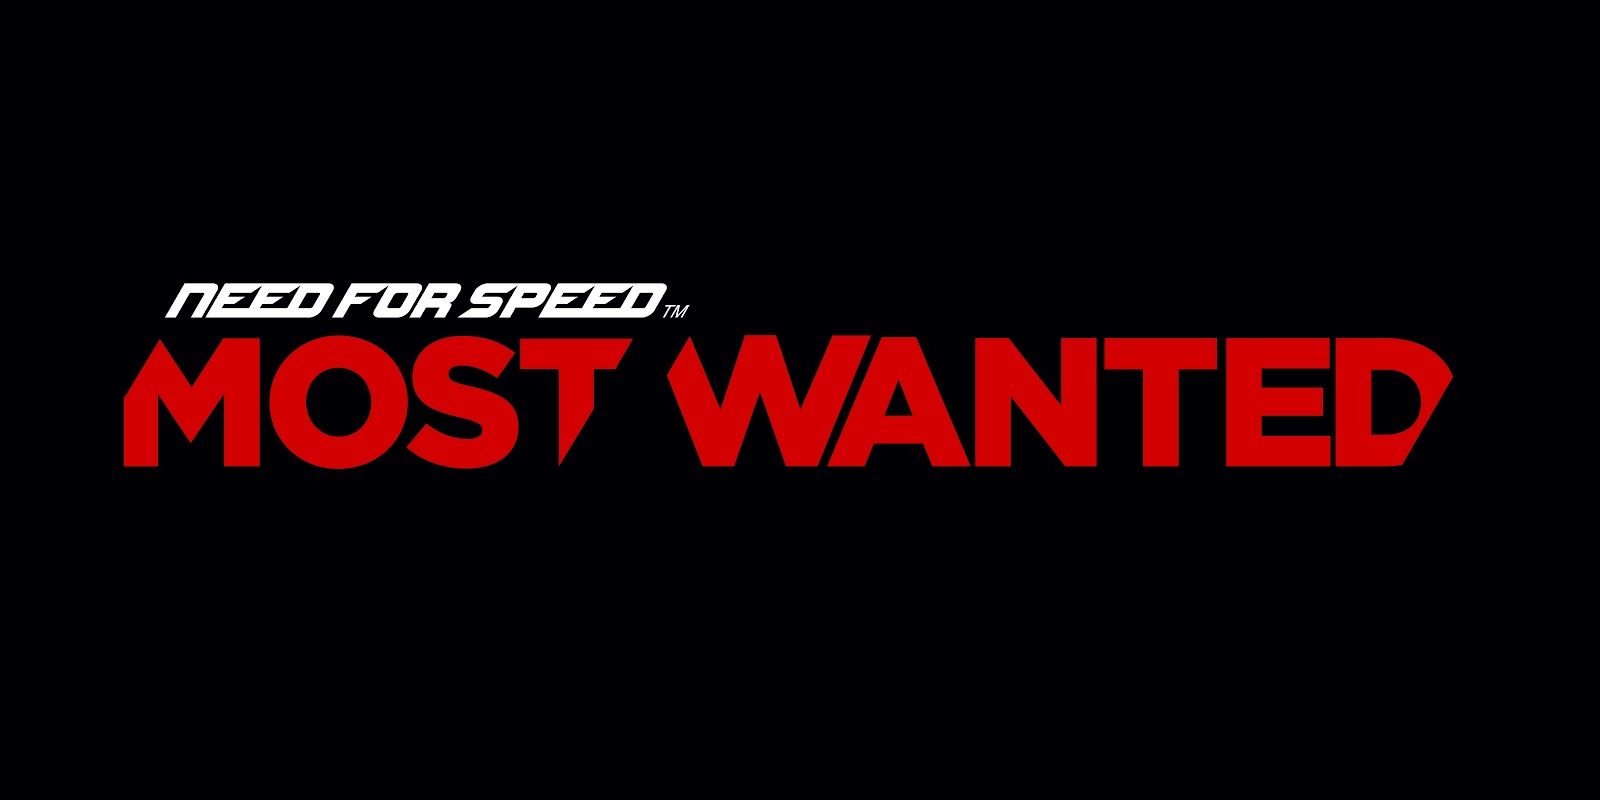 Hd Wallpaper Mania Need For Speed Most Wanted 2012 For Speed Most Wanted Soundtrack 2011 HD Wallpaper